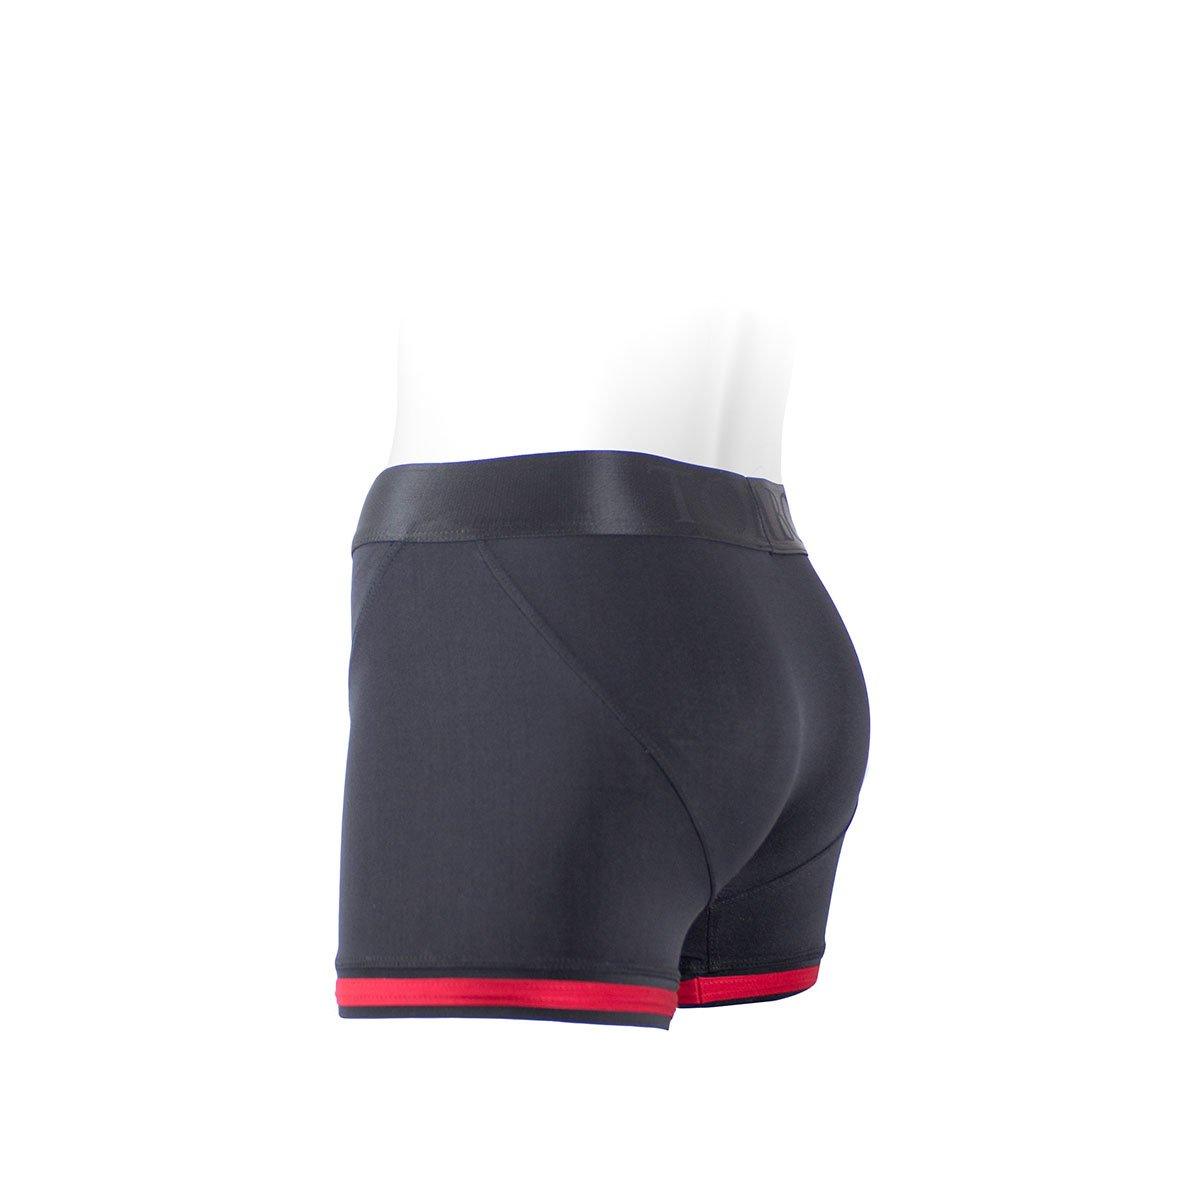 SpareParts Tomboii Black and Red - Nylon - shop enby